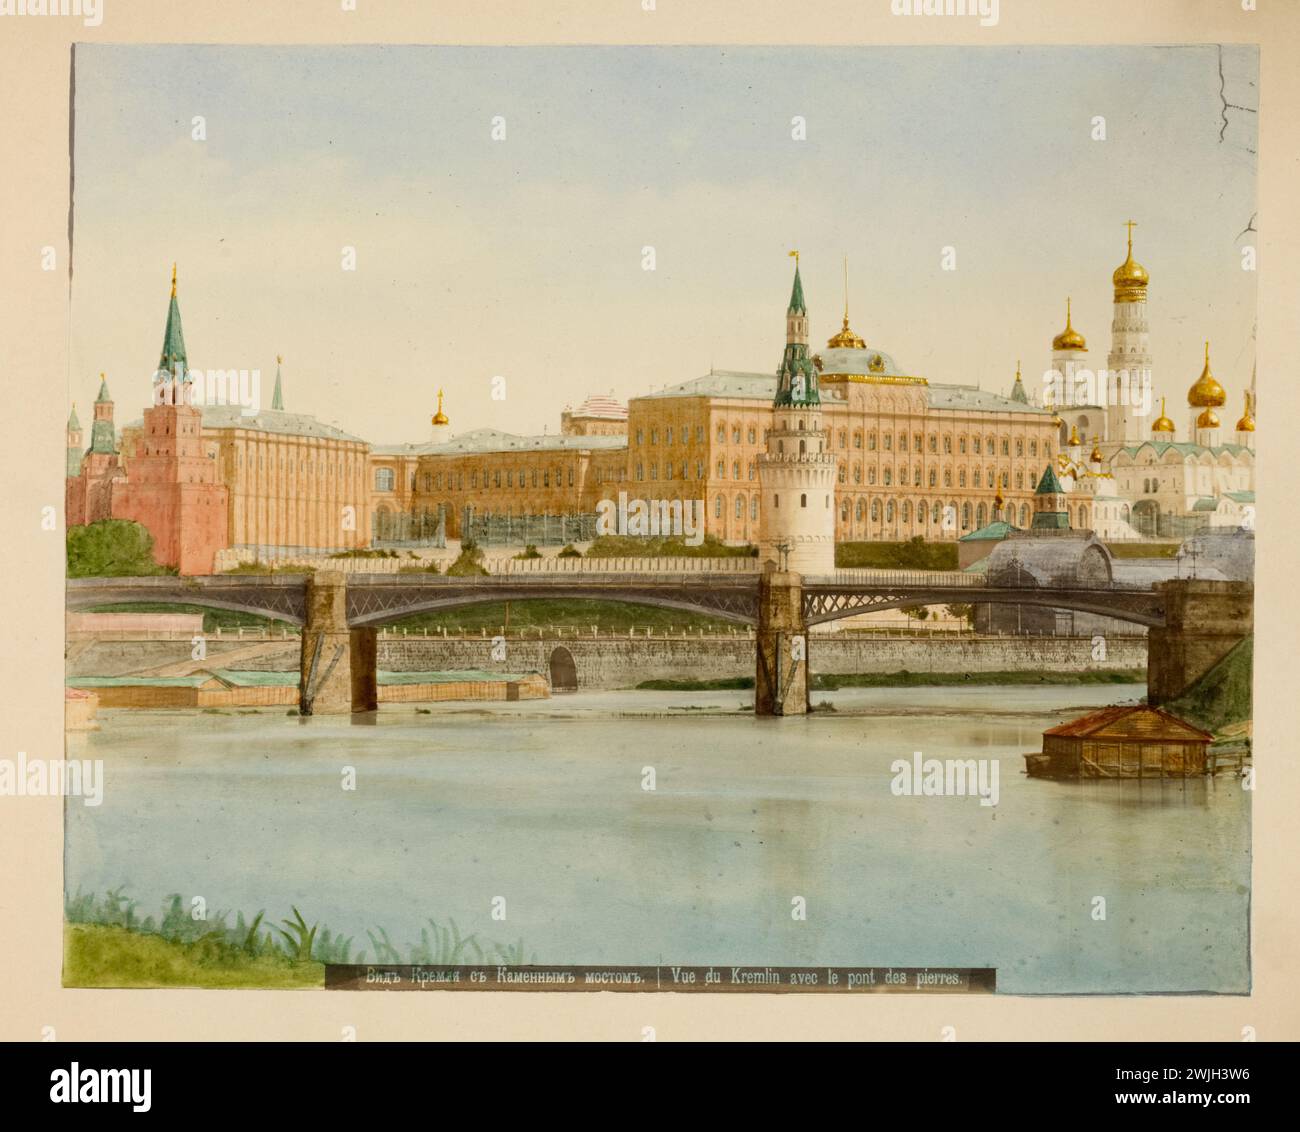 View of the Kremlin with the Stone Bridge.  Moscow, Russia, Handcolored photographs mounted on cards.  Late 19th century Stock Photo